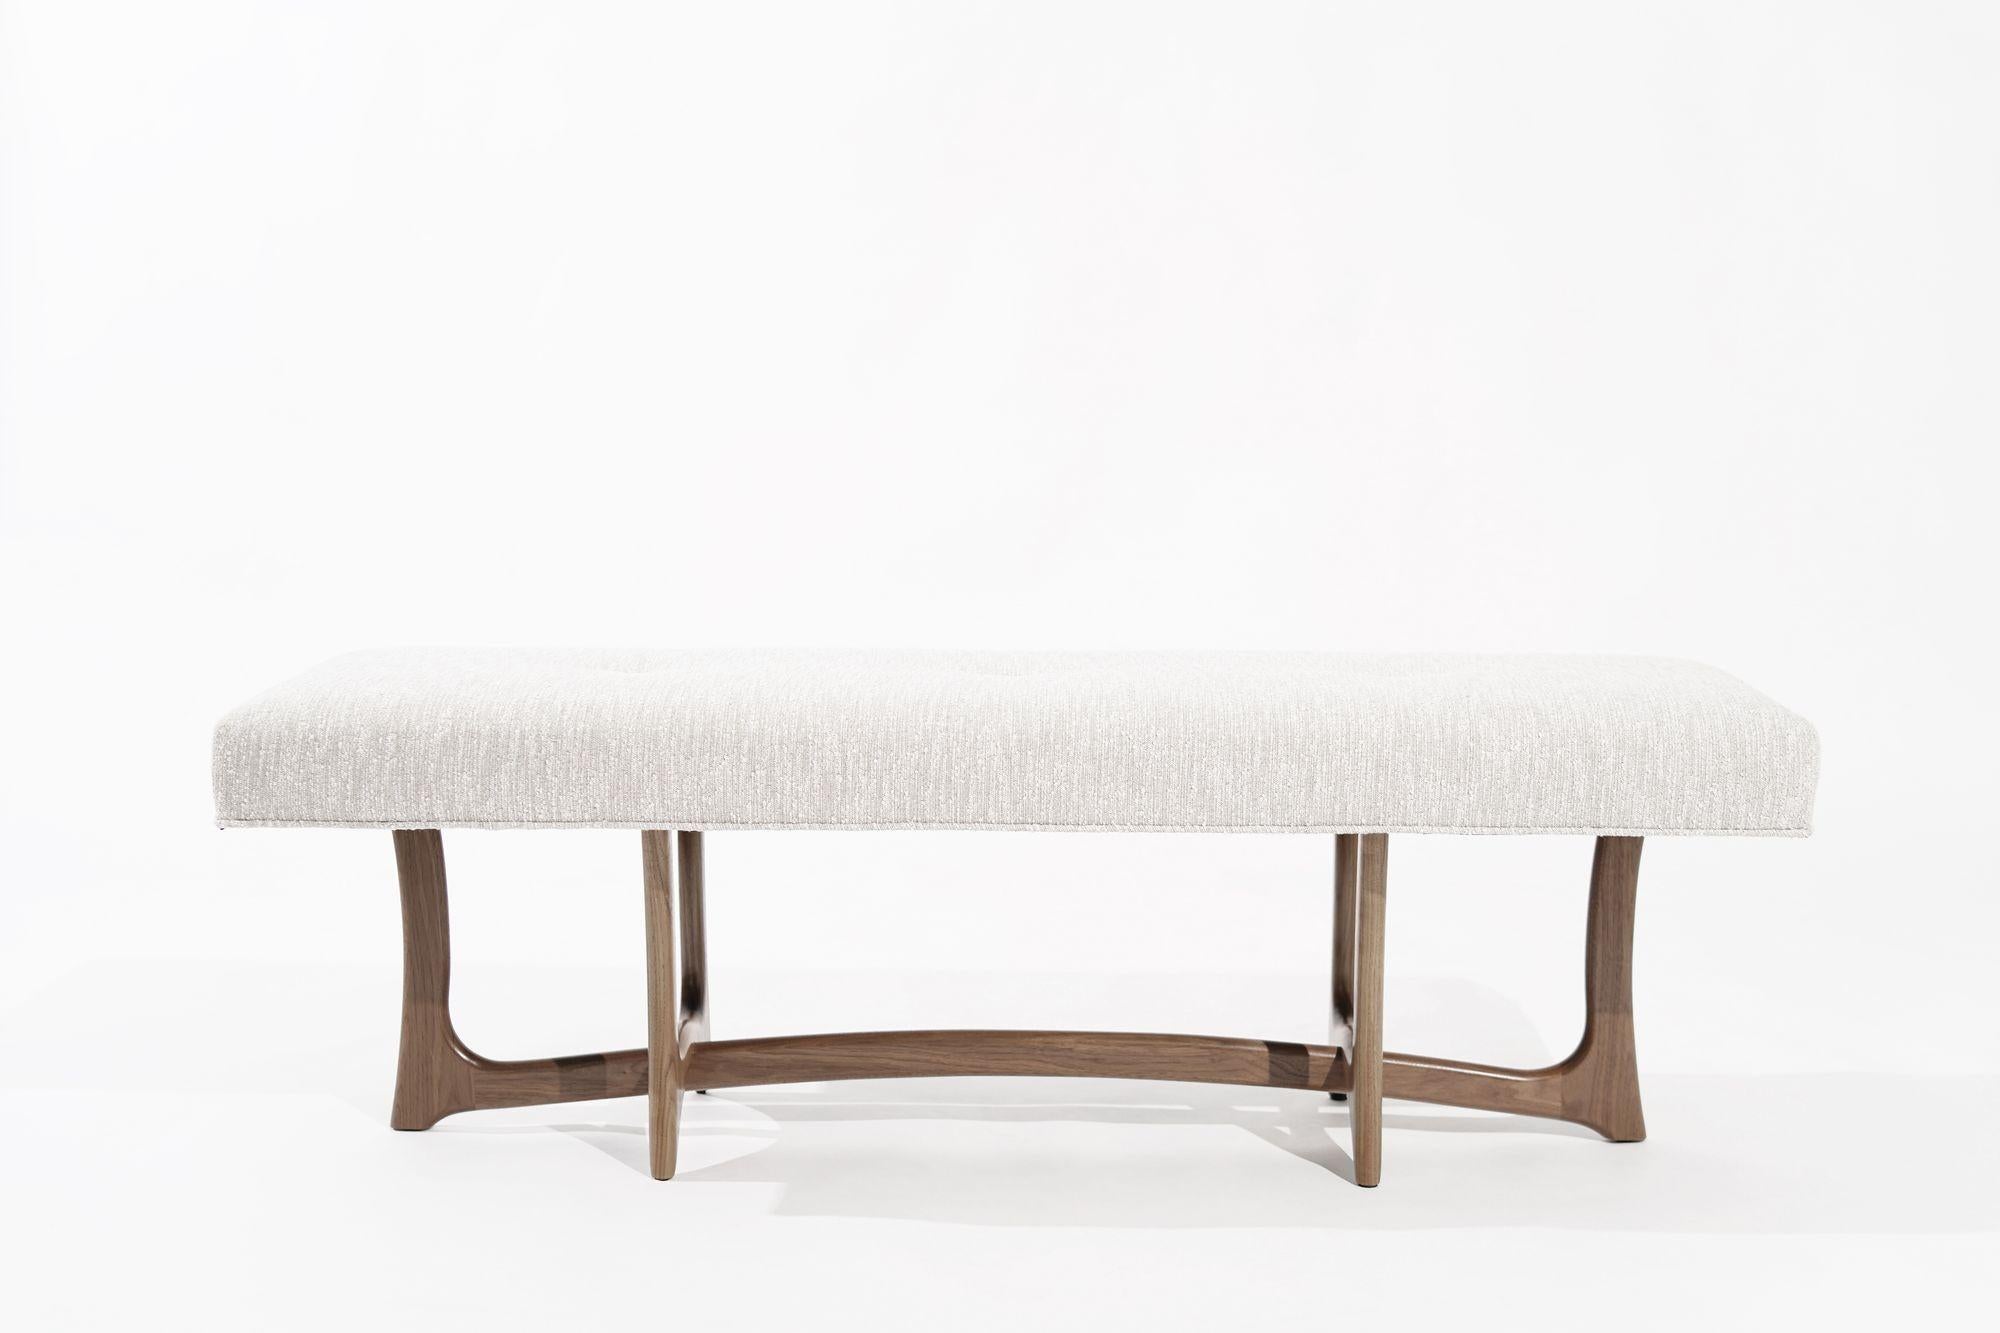 Introducing the Forma Bench by Stamford Modern—an embodiment of Mid-Century Modern elegance, seamlessly blending visionary designs by Adrian Pearsall and Vladimir Kagan. With a sculpted walnut base and plush upholstered cushion, it offers both form